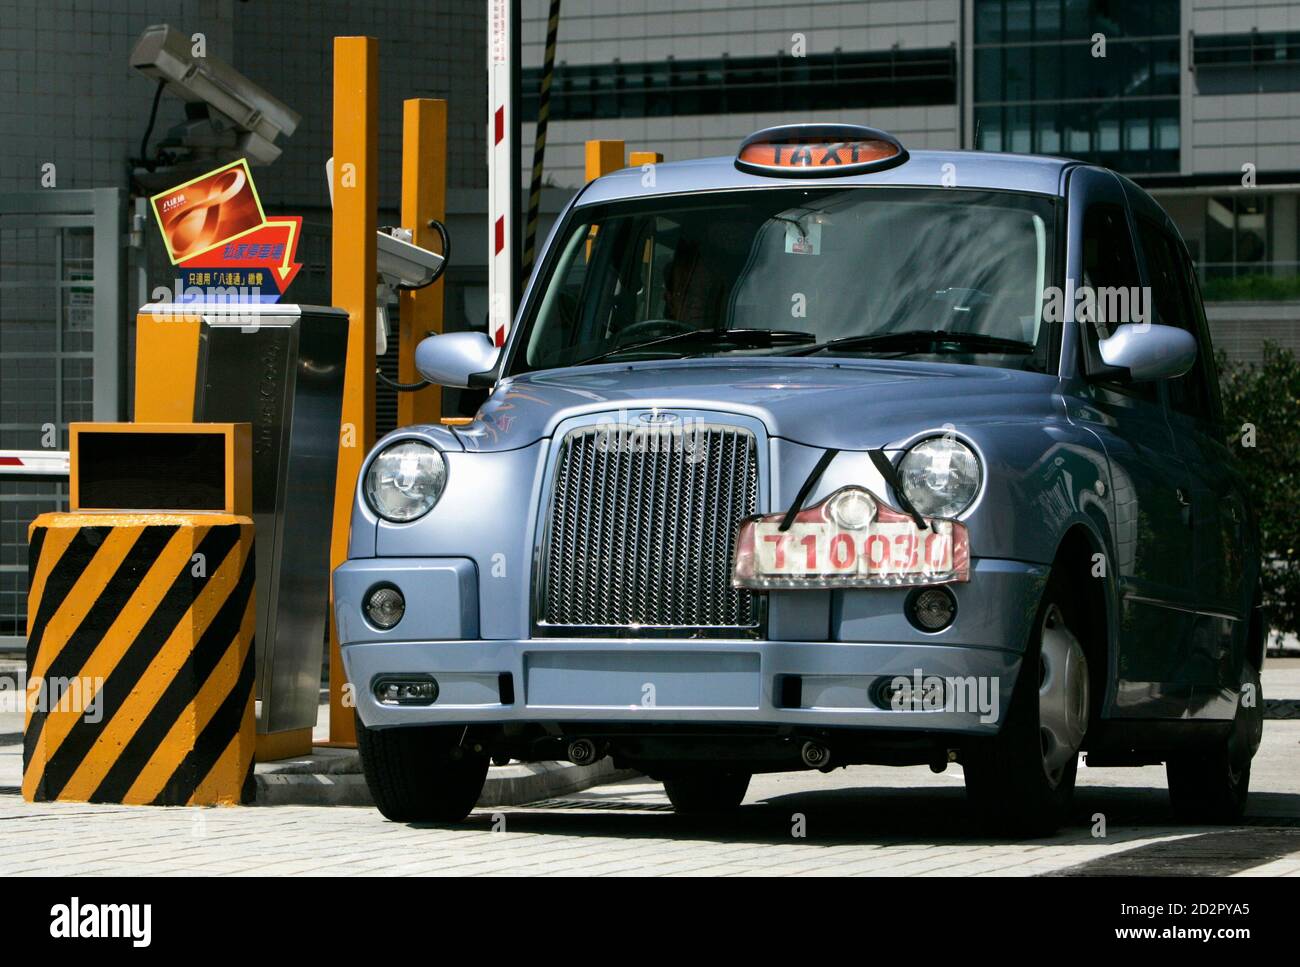 The new TX4 London taxi, which was manufactured by LTI Ltd, exits a car  park in Hong Kong May 29, 2007. Geely Automobile Holdings Limited, which  bought LTI's parent company Britain's Manganese